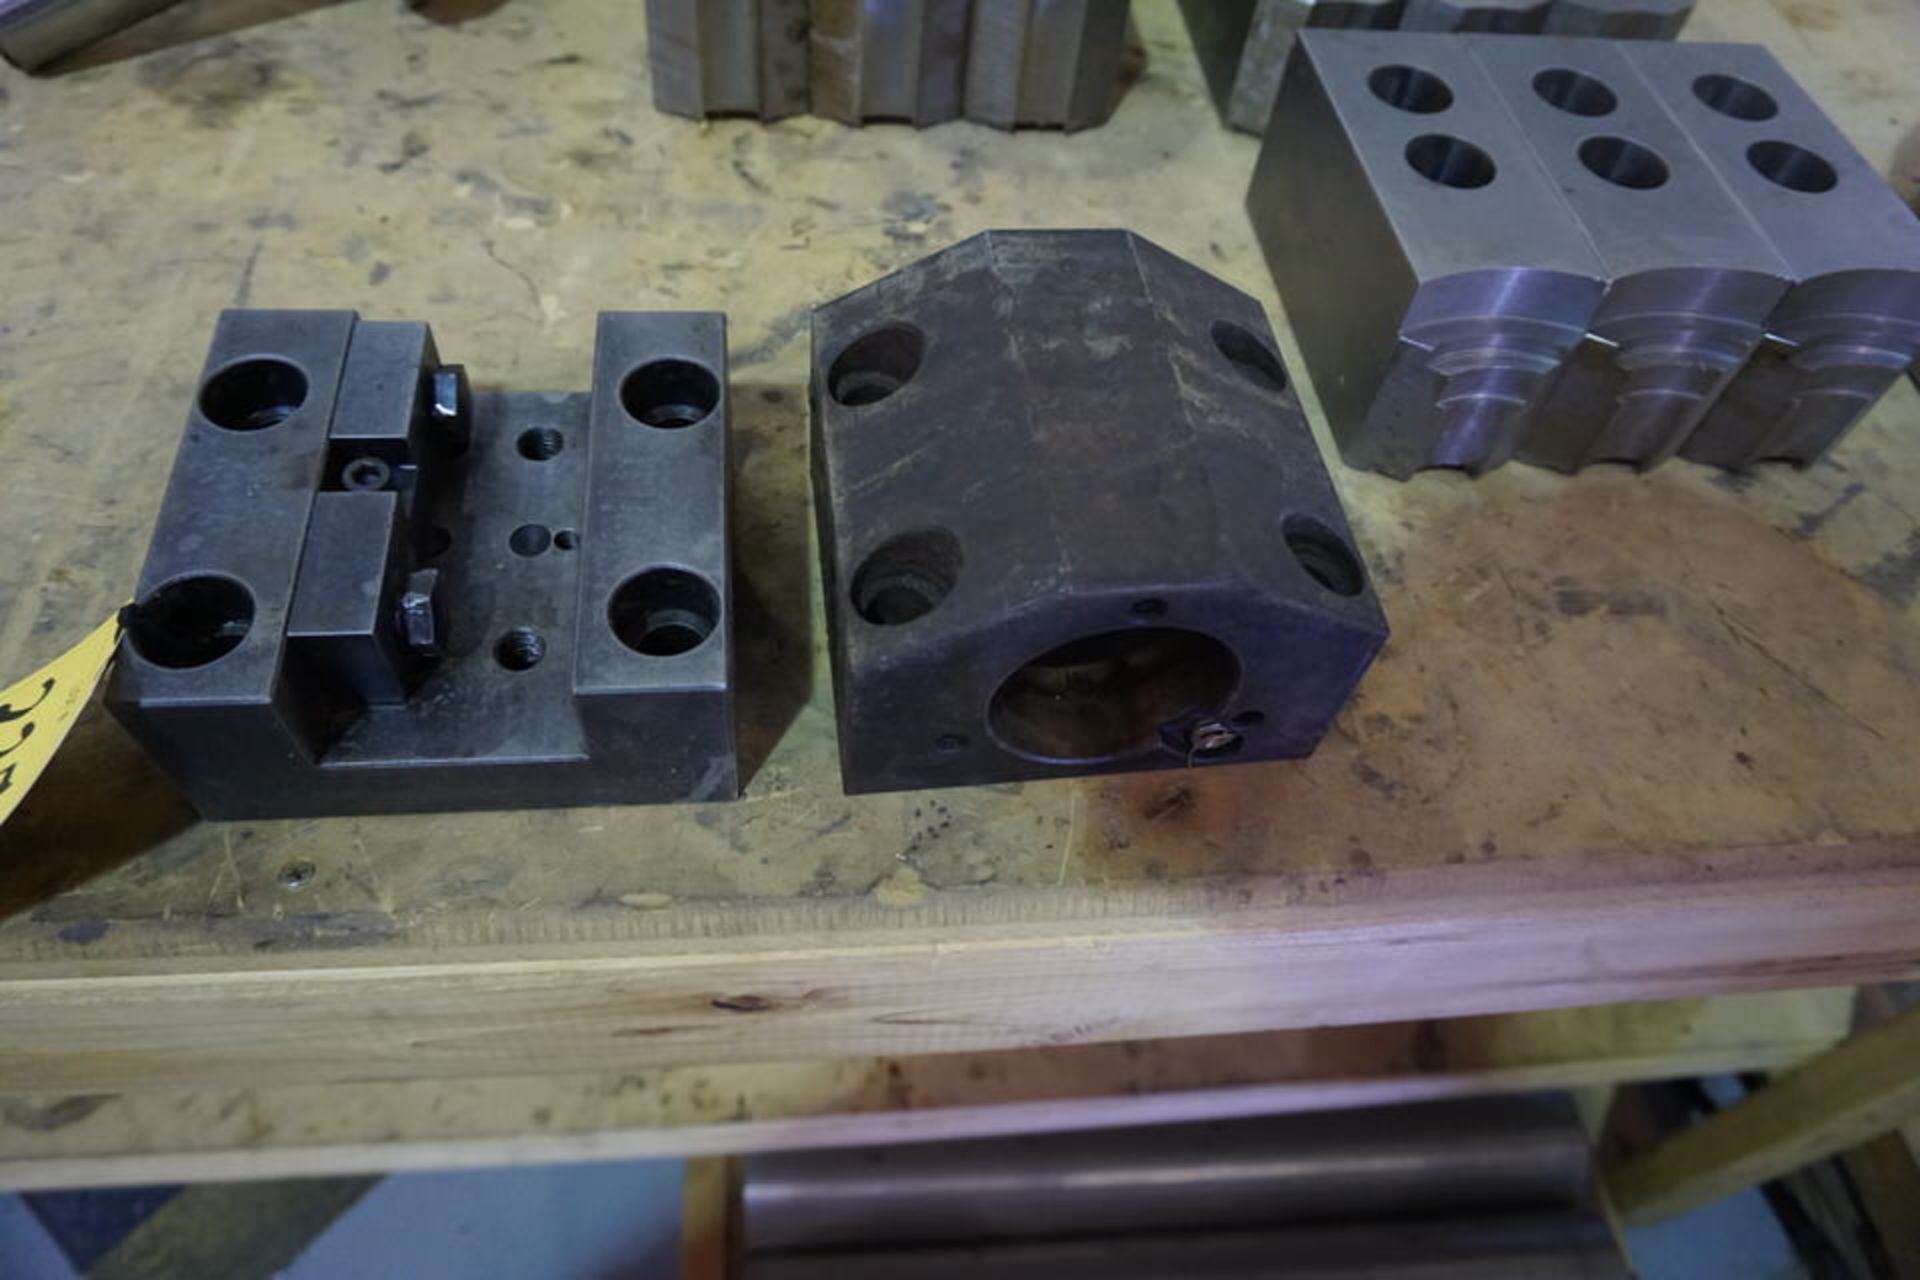 12" 3 JAW CHUCK, 3 SETS OF CHUCK JAWS, LIVE CENTER, TOOLING BLOCKS - Image 3 of 5